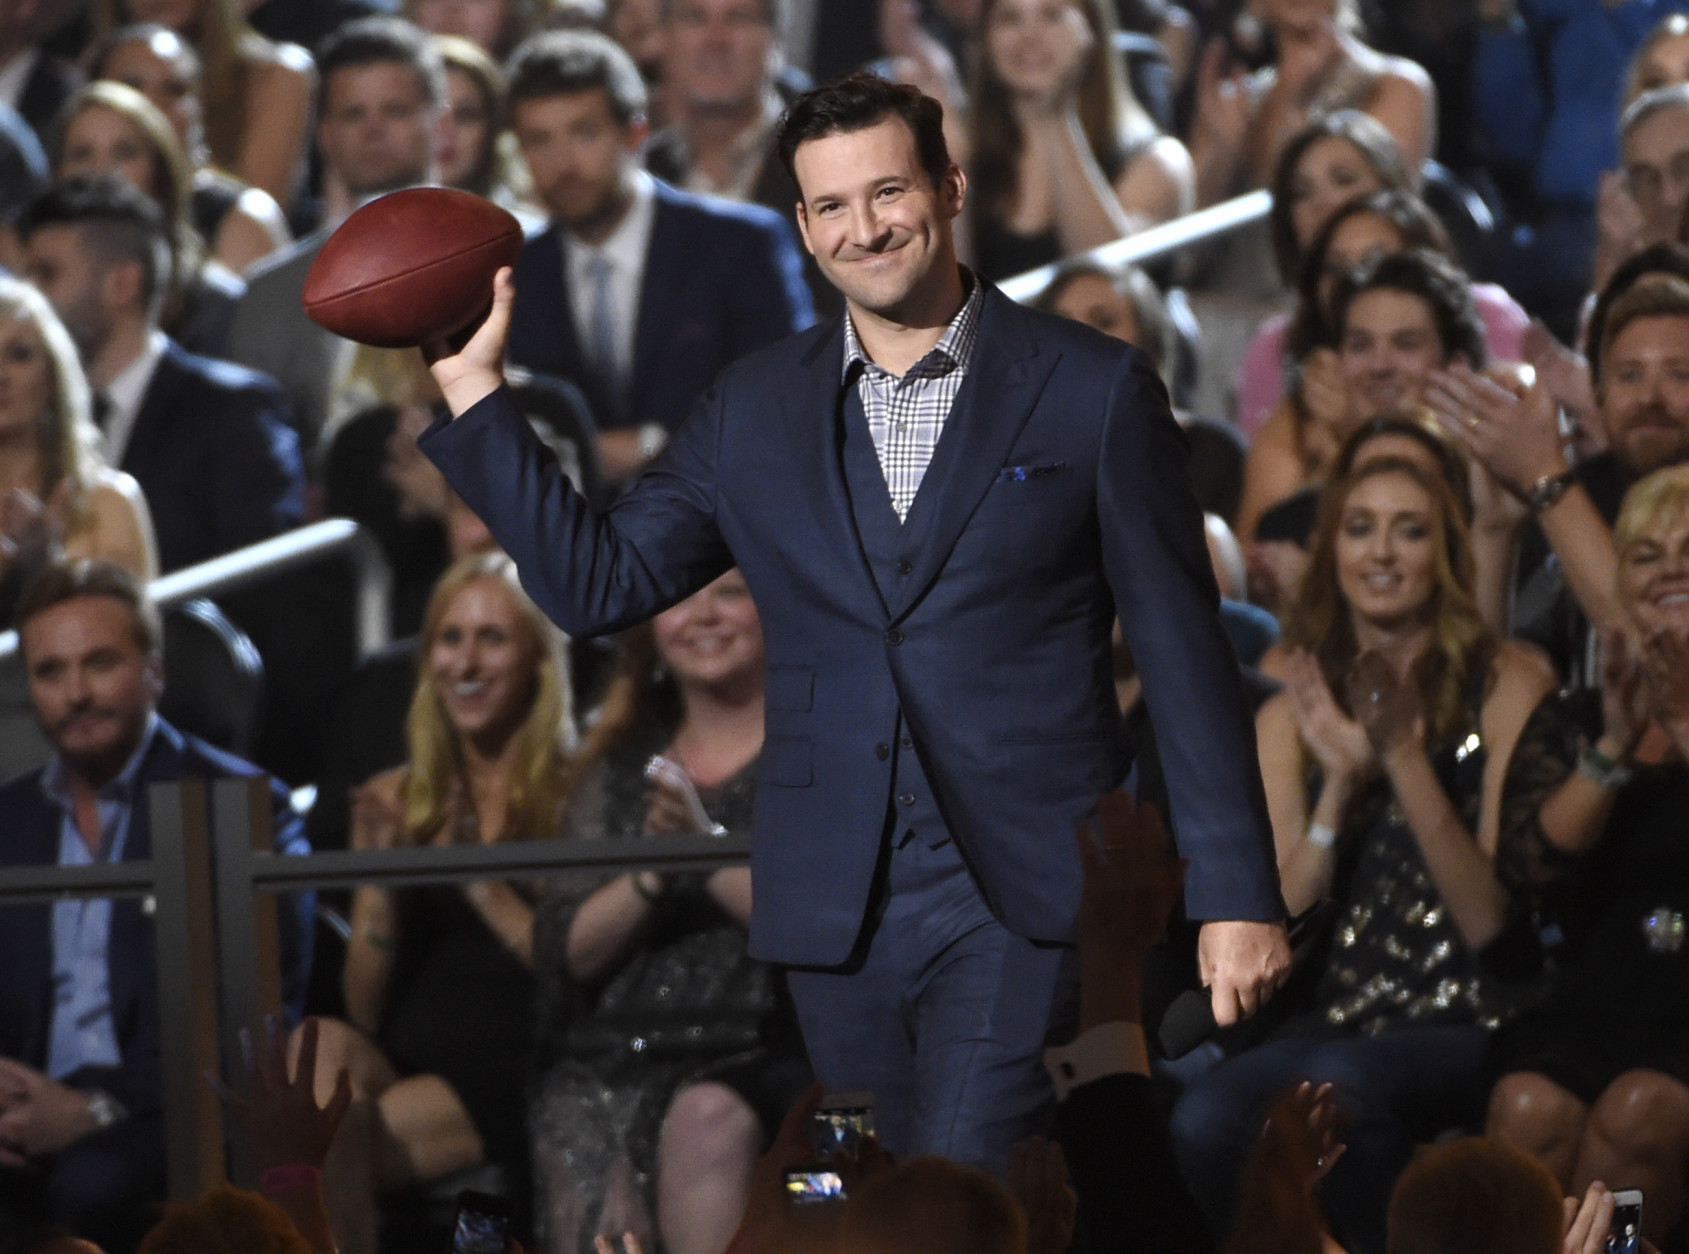 Tony Romo walks on stage at the 50th annual Academy of Country Music Awards at AT&amp;T Stadium on Sunday, April 19, 2015, in Arlington, Texas. (Photo by Chris Pizzello/Invision/AP)